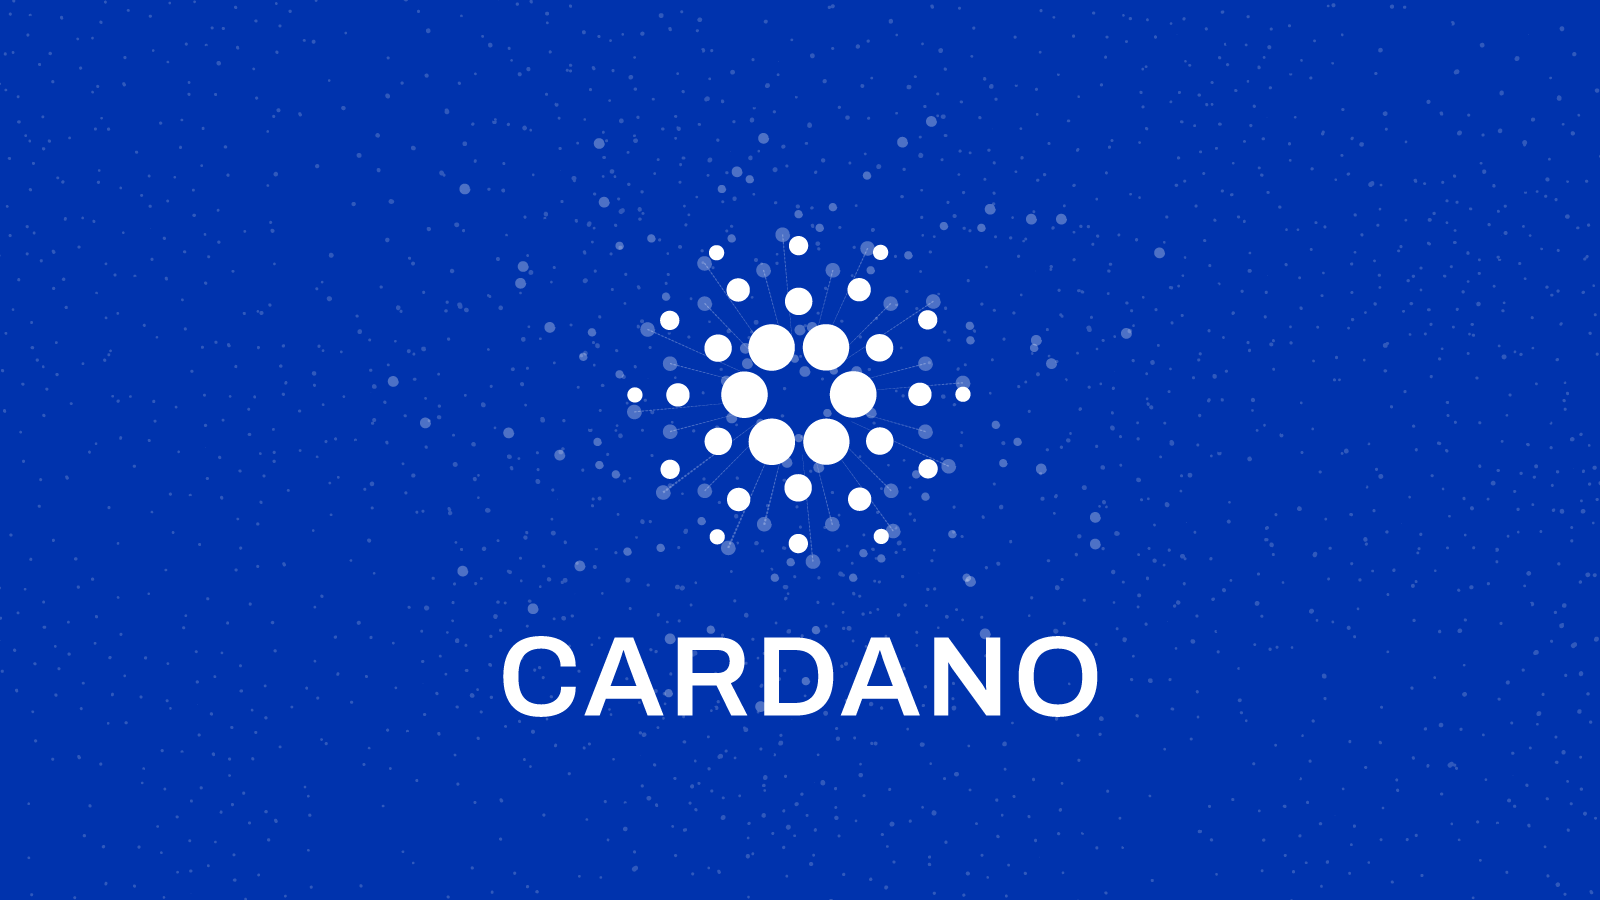 Cardano NFT Sales Reached $27 million, And ADA Is Attempting To Rebound